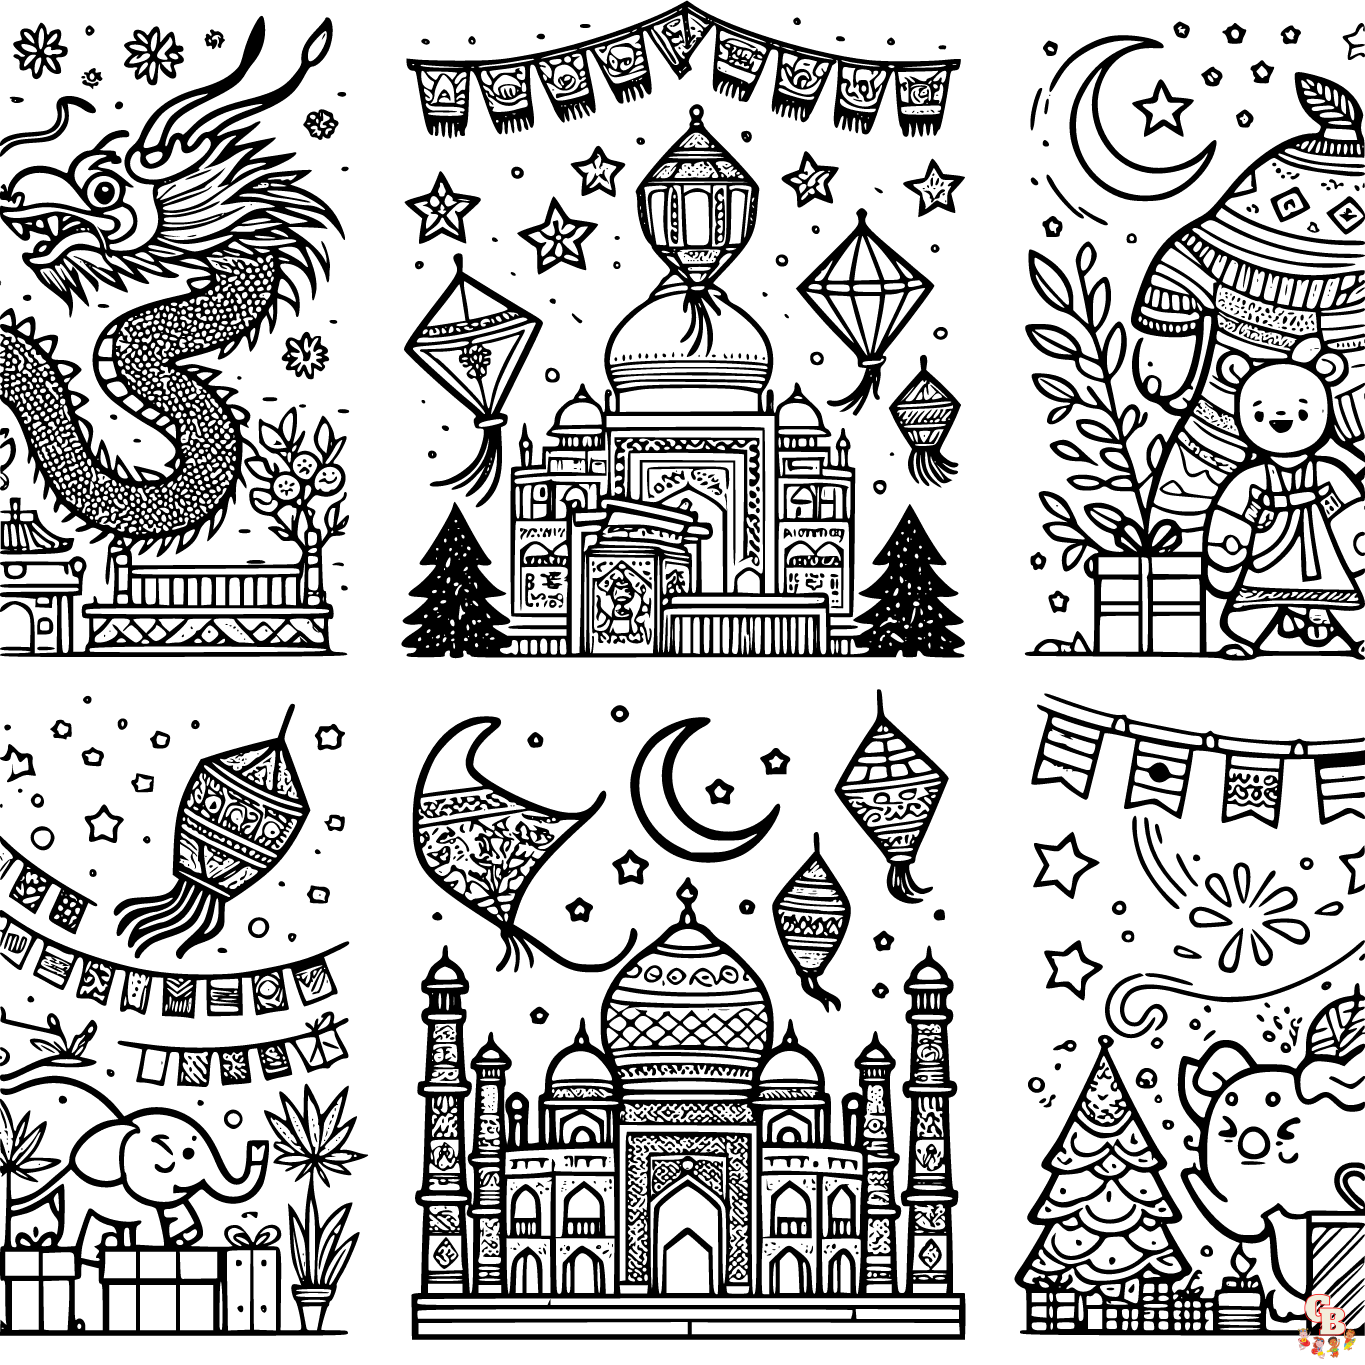 Printable holidays around the world coloring pages free